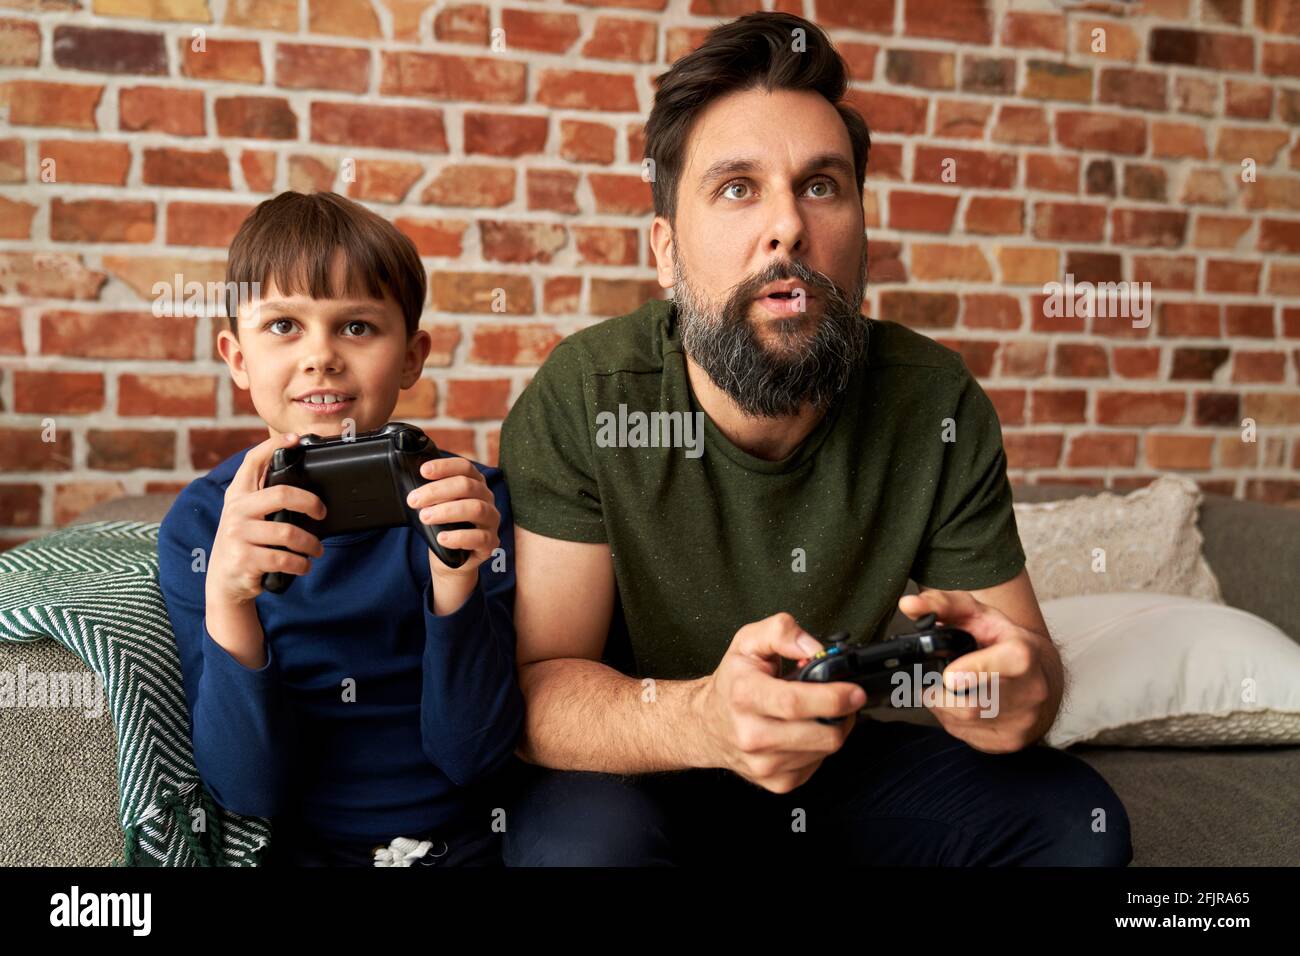 Focused father and son playing video game together Stock Photo